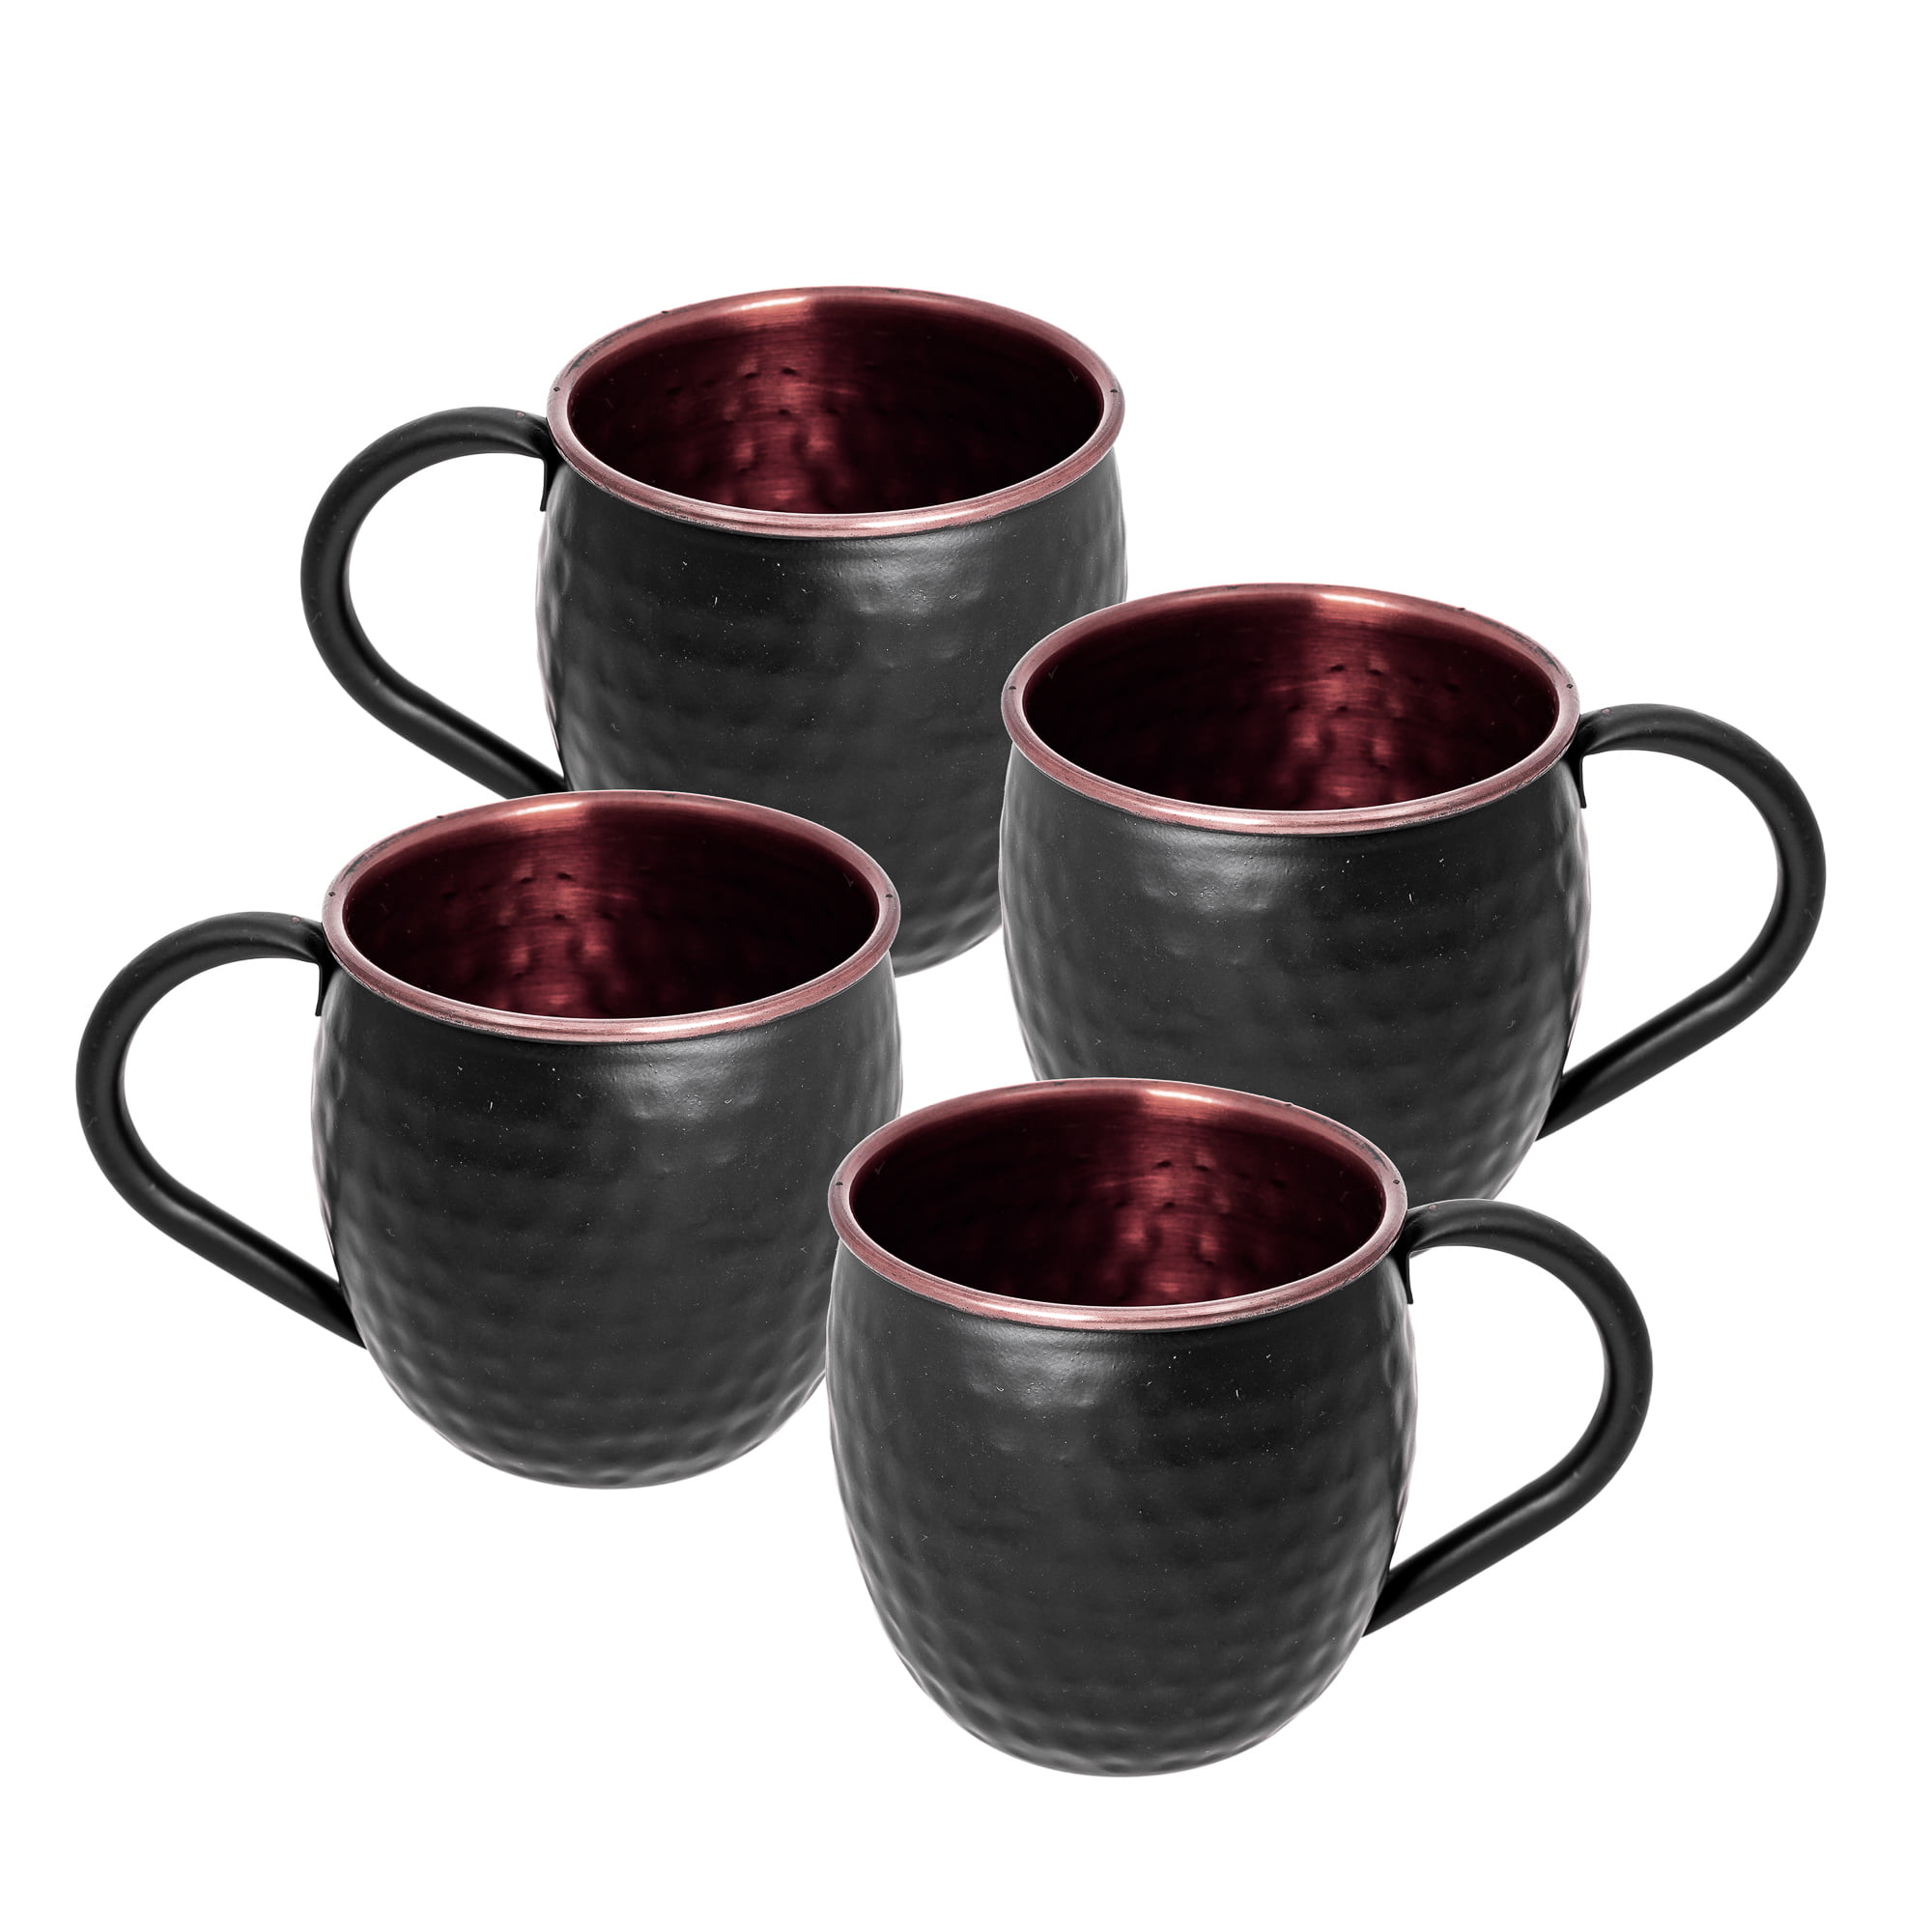 4 Pack Stainless Steel Hammered Moscow Mule Mug Black & Copper